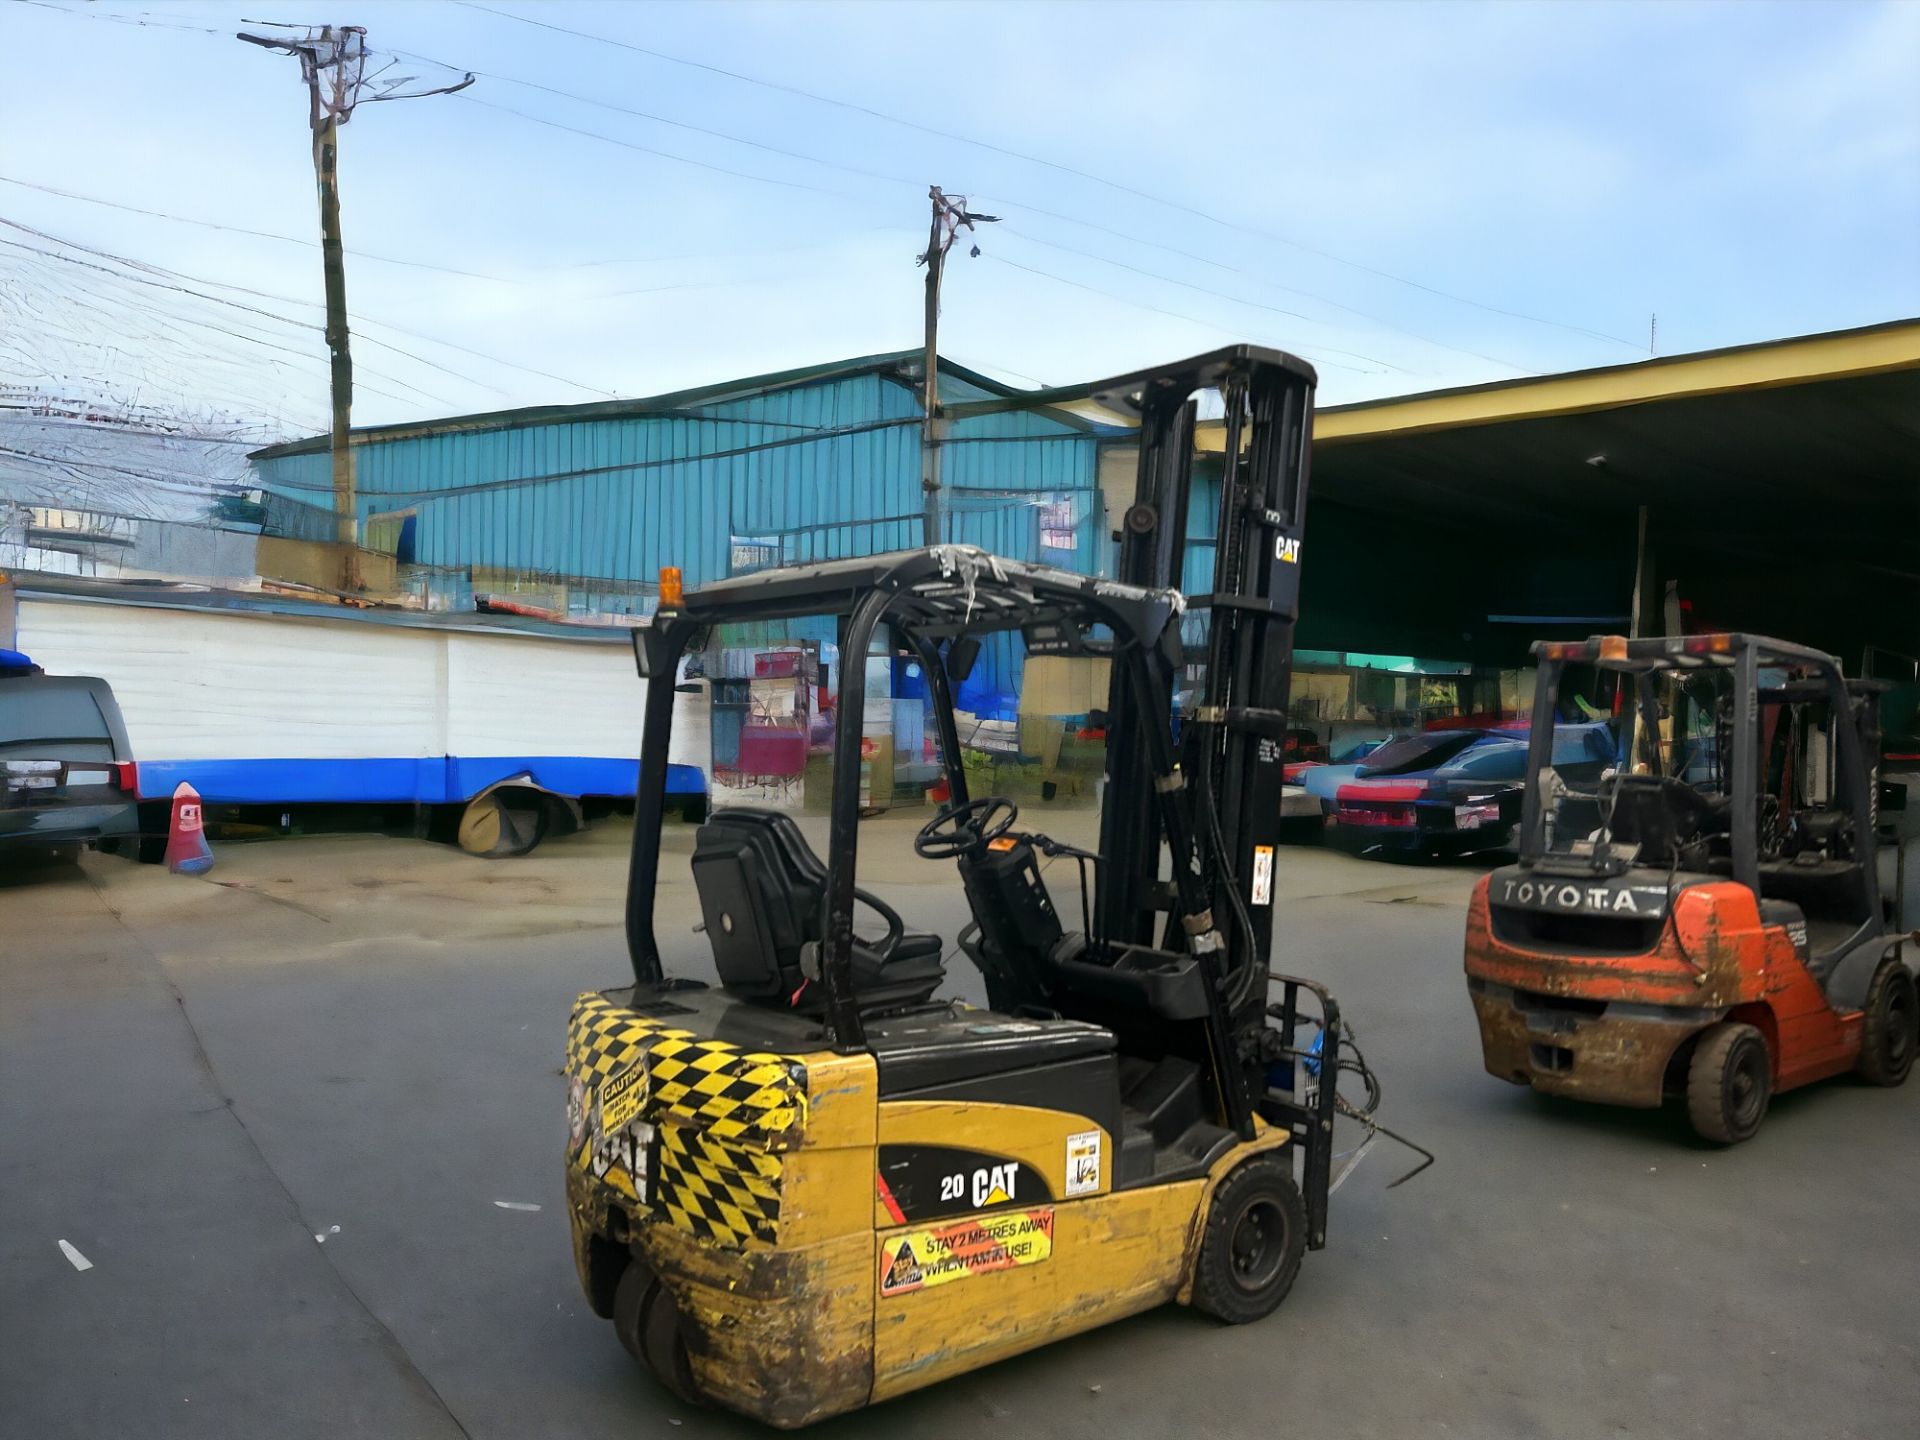 CAT EP20NT-48E ELECTRIC FORKLIFT - EFFICIENT MATERIAL HANDLING SOLUTION **(INCLUDES CHARGER)** - Image 6 of 6